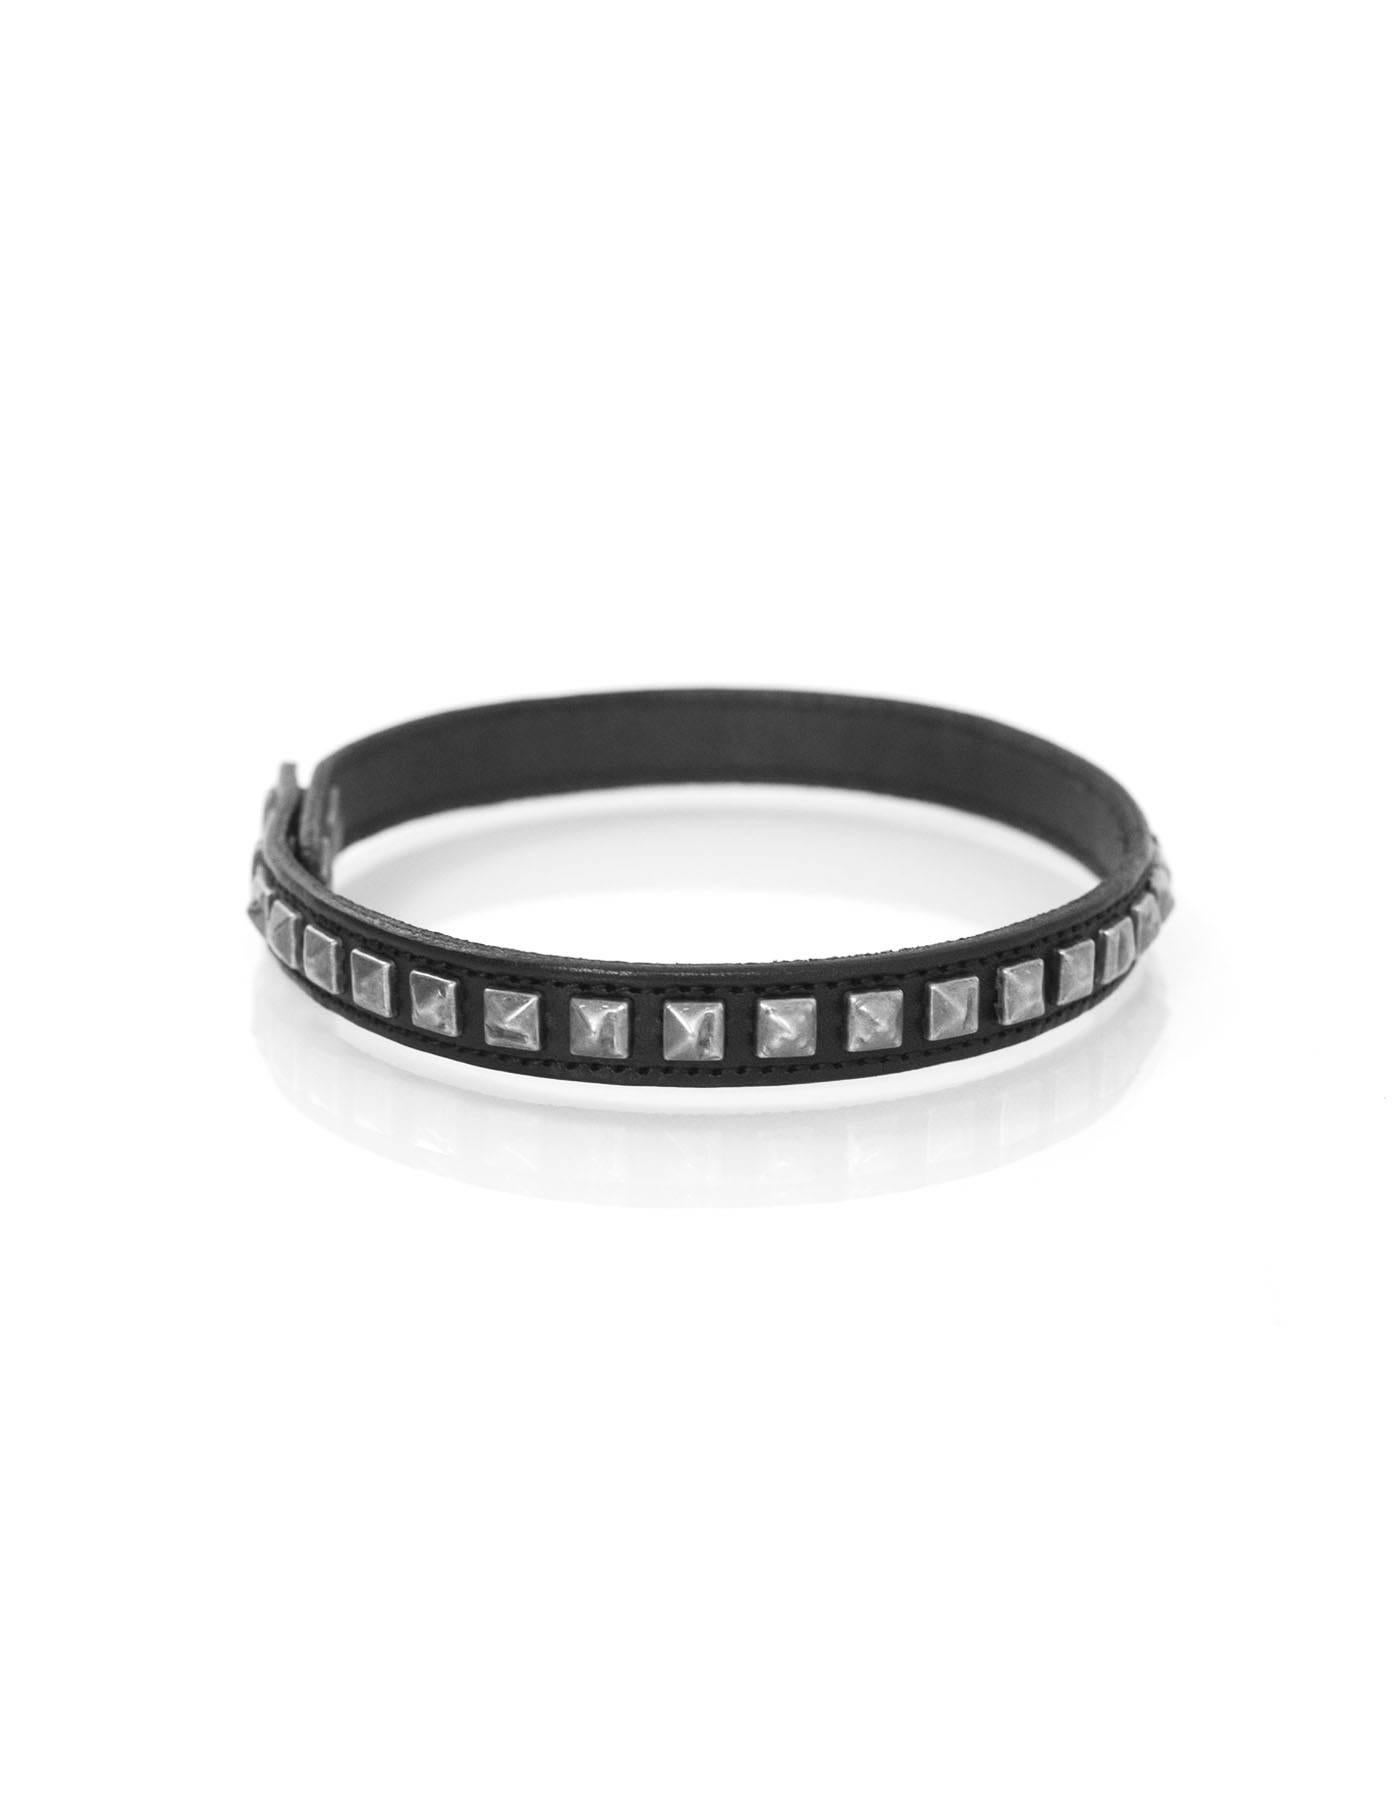 Saint Laurent NEW Black Leather Studded Choker

Made In: Italy
Year of Production: 2015
Color: Black
Hardware: Oxidized silvertone
Materials: Leather and metal
Closure/Opening: Double snap closure
Stamp: GBL403593.0715
Retail Price: $295 +